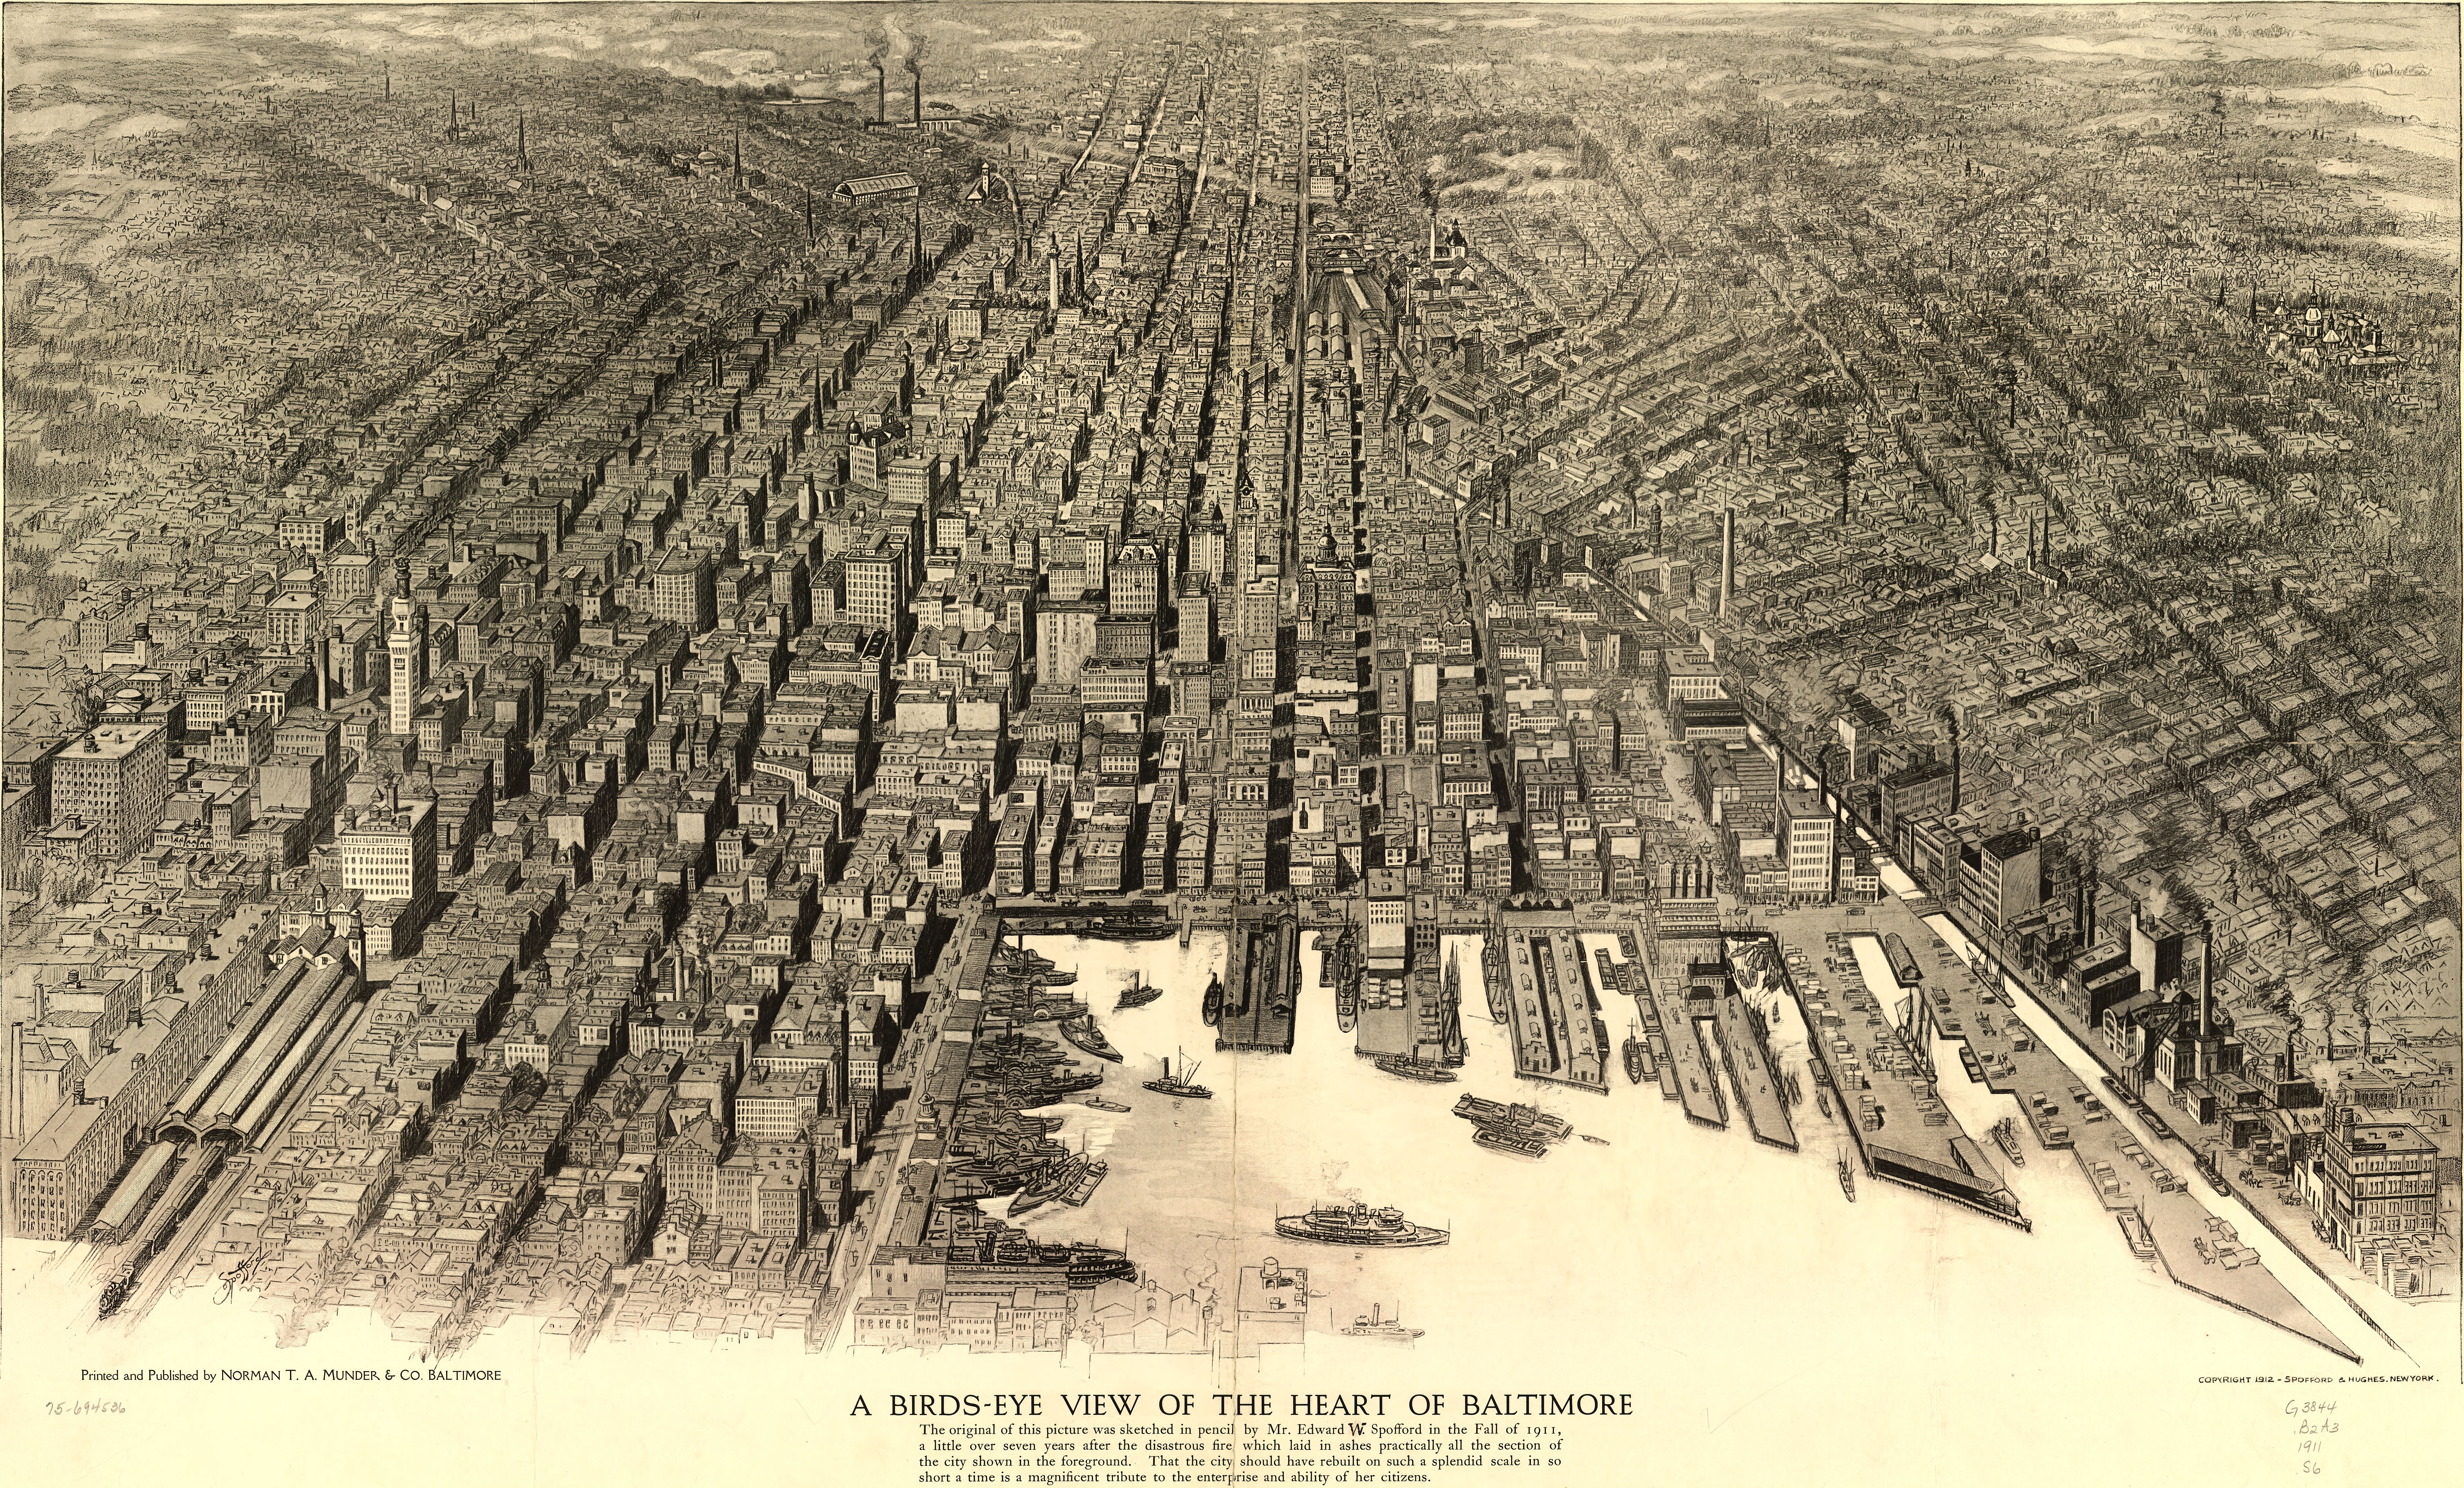 Baltimore in 1912